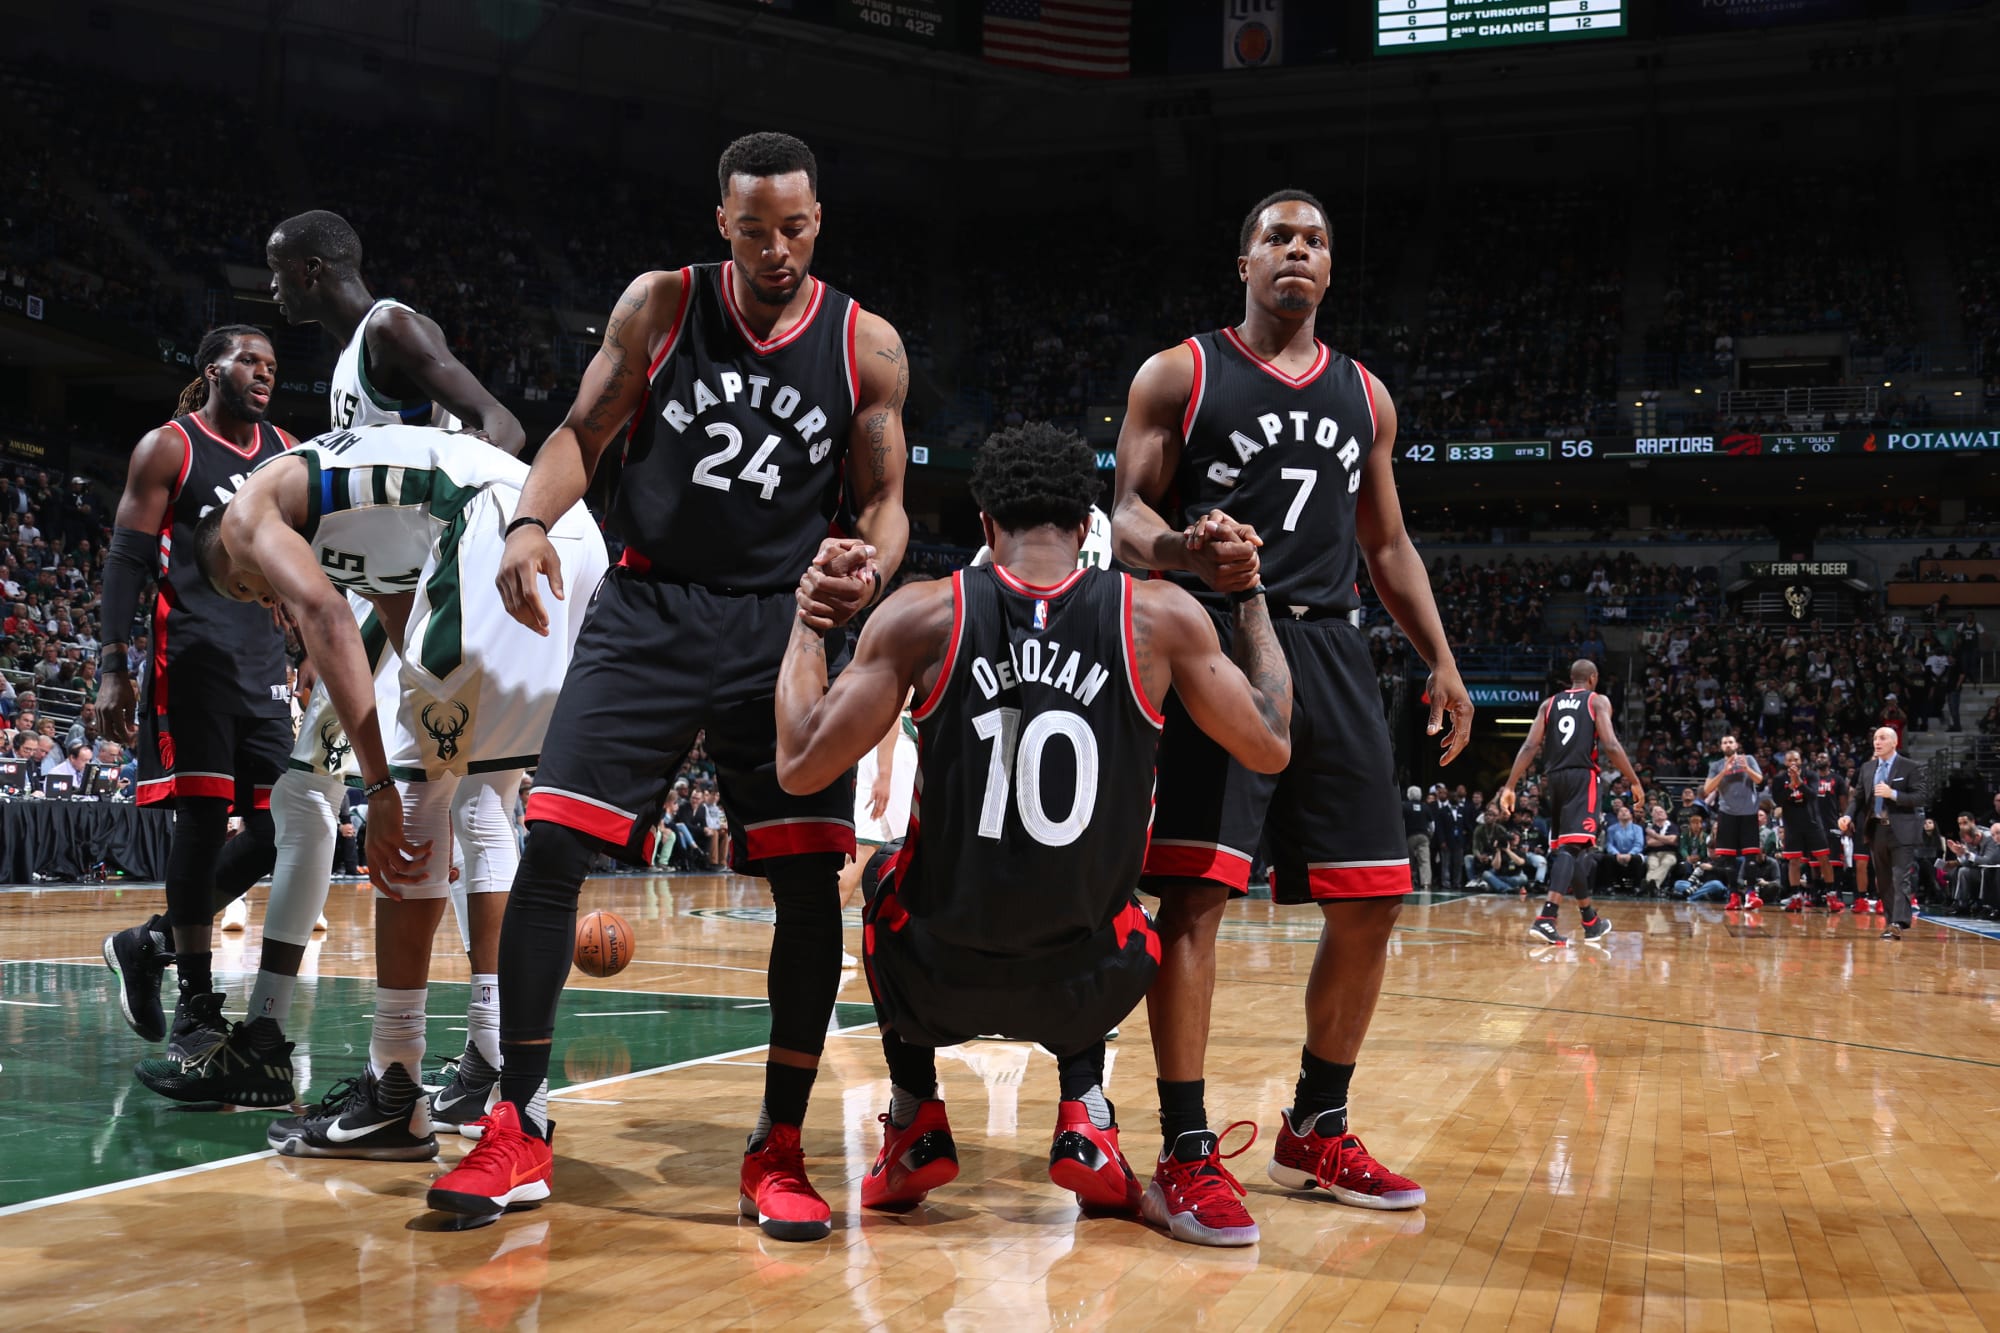 Raptors need to develop leadership and chemistry to contend.